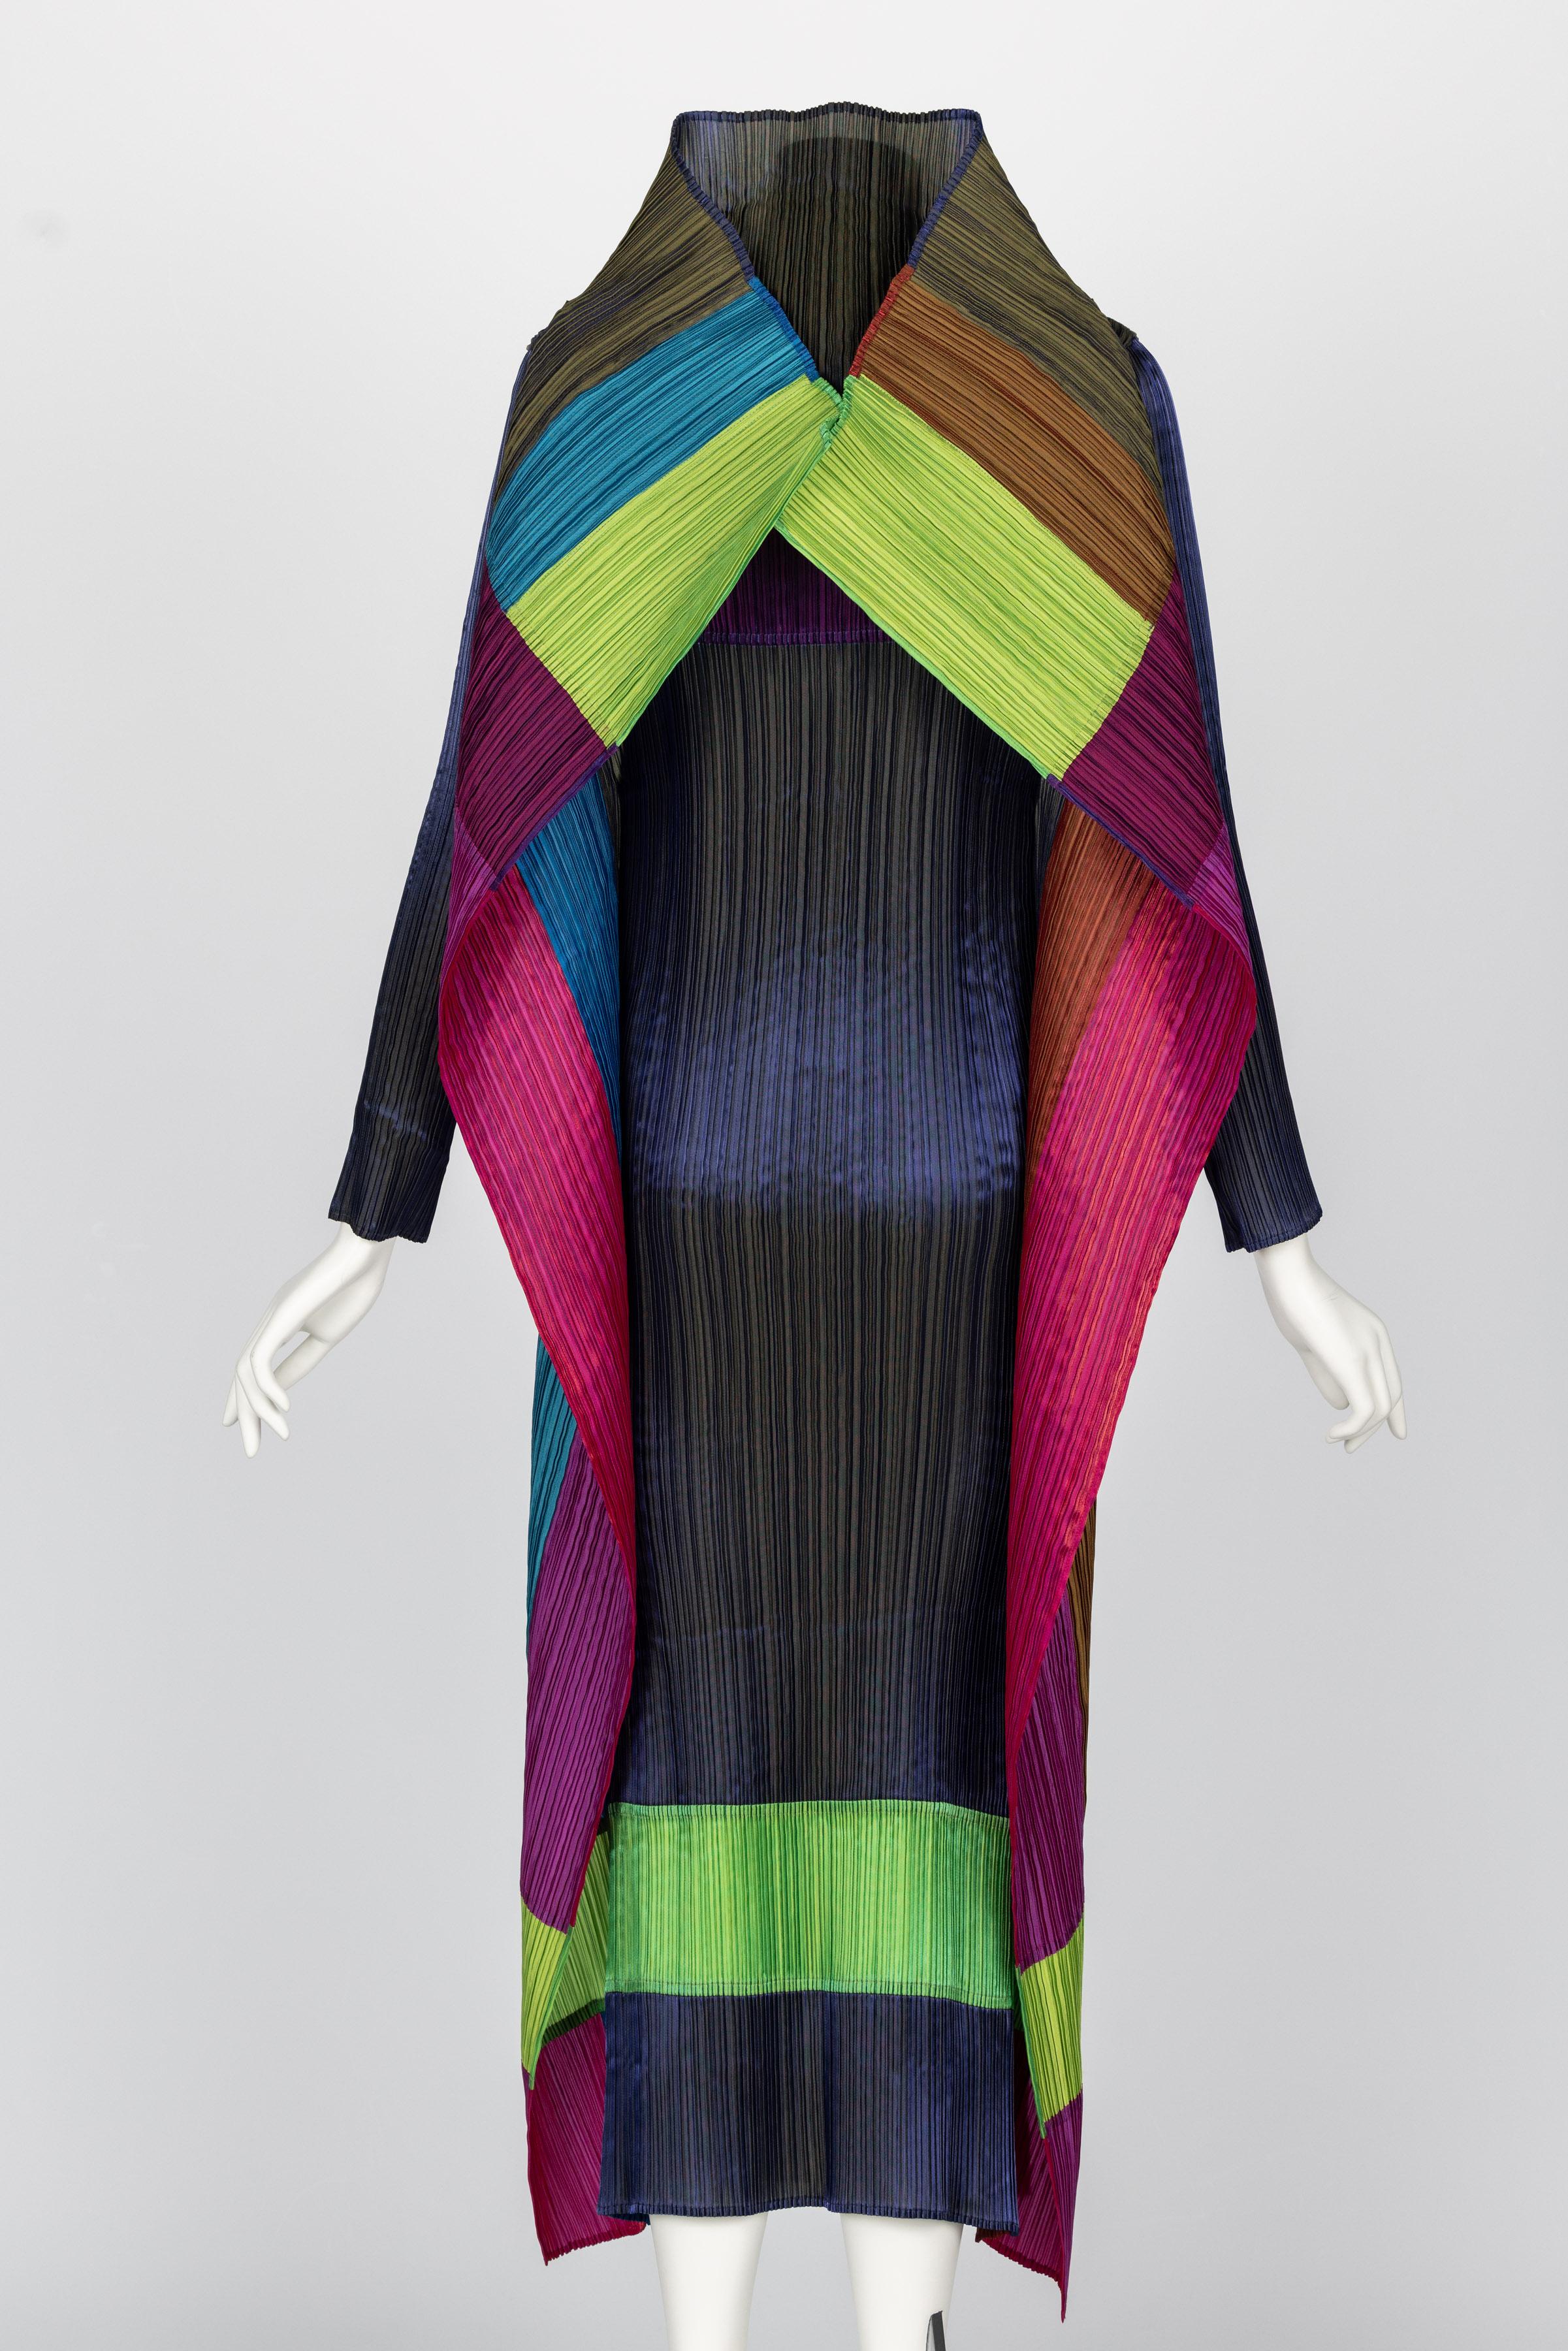 Incredible Rare Issey Miyake Pleats Please Avant Garde Color Block Dress For Sale 3